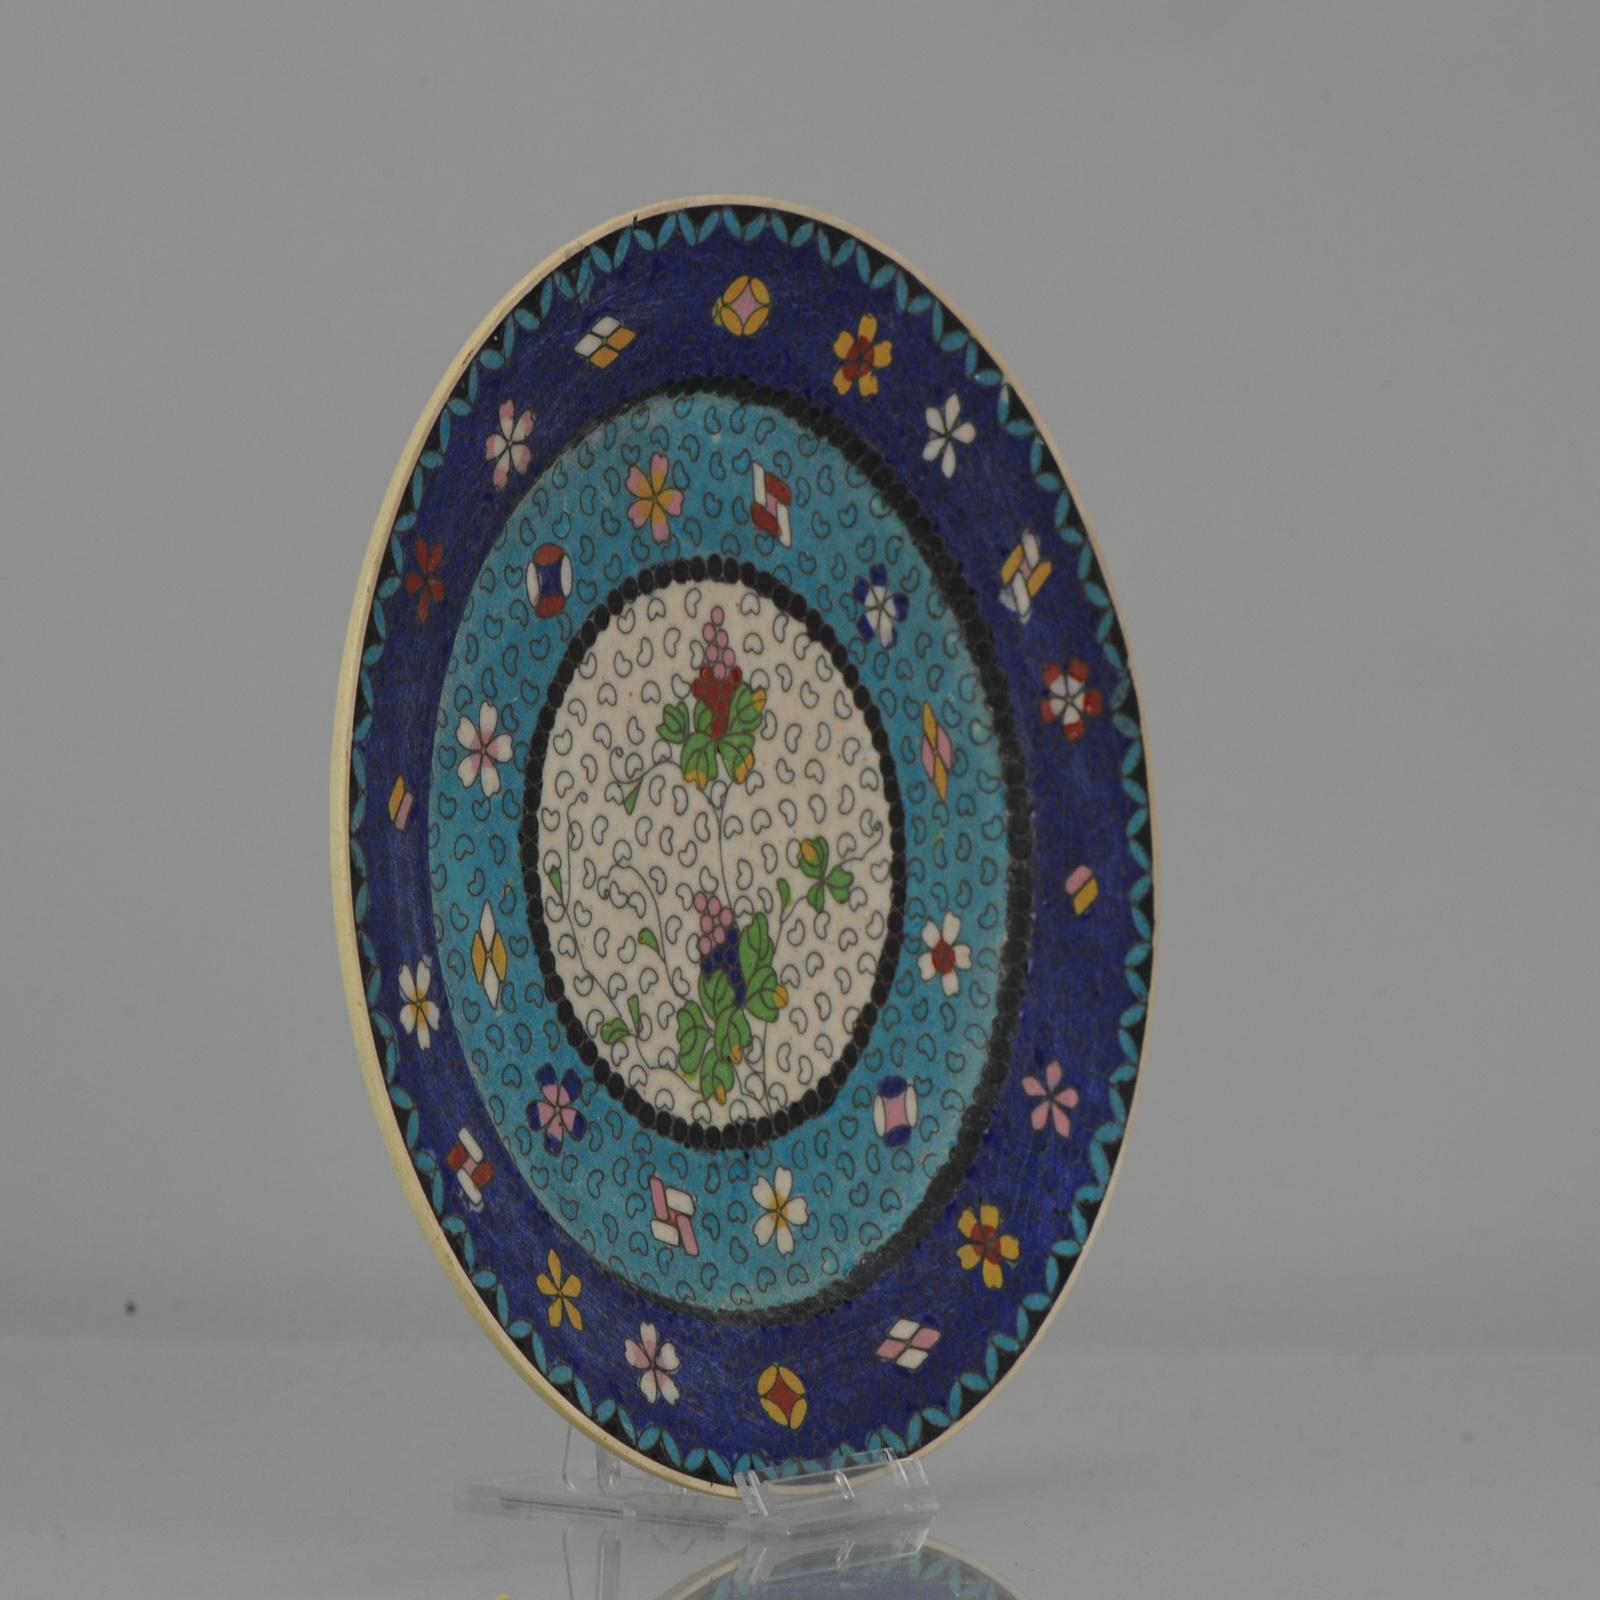 A Japanese Totai Shippo cloisonne (cloisonné ) pottery plate. The plate has the usual cream coloured body that is normally associated with satsuma ware. It has been decorated with a large number of small brass cloisons (wires) with a